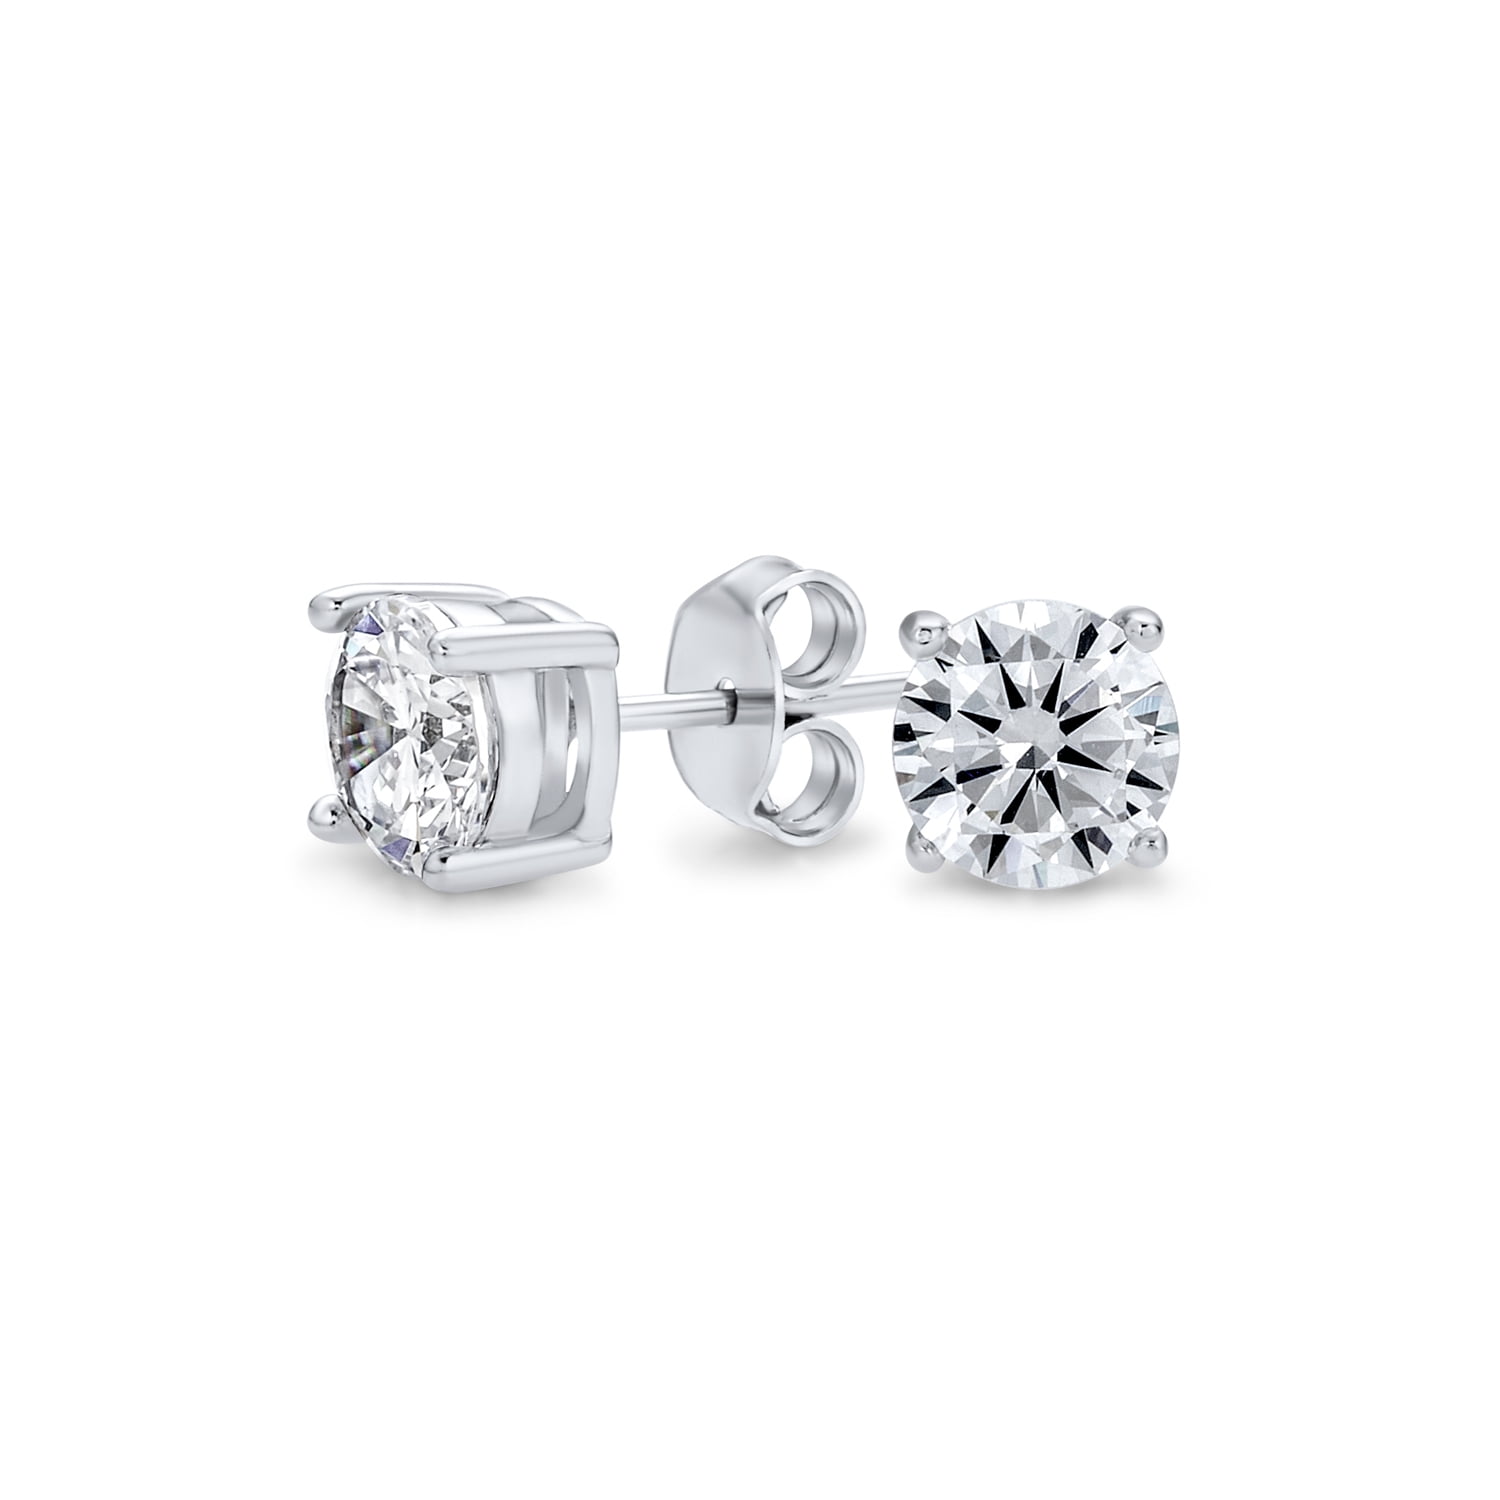 .75 CT Brilliant Cut Round Solitaire Stud Earrings For Women For Men For Girlfriend 4 Prong 925 Sterling Silver 5mm